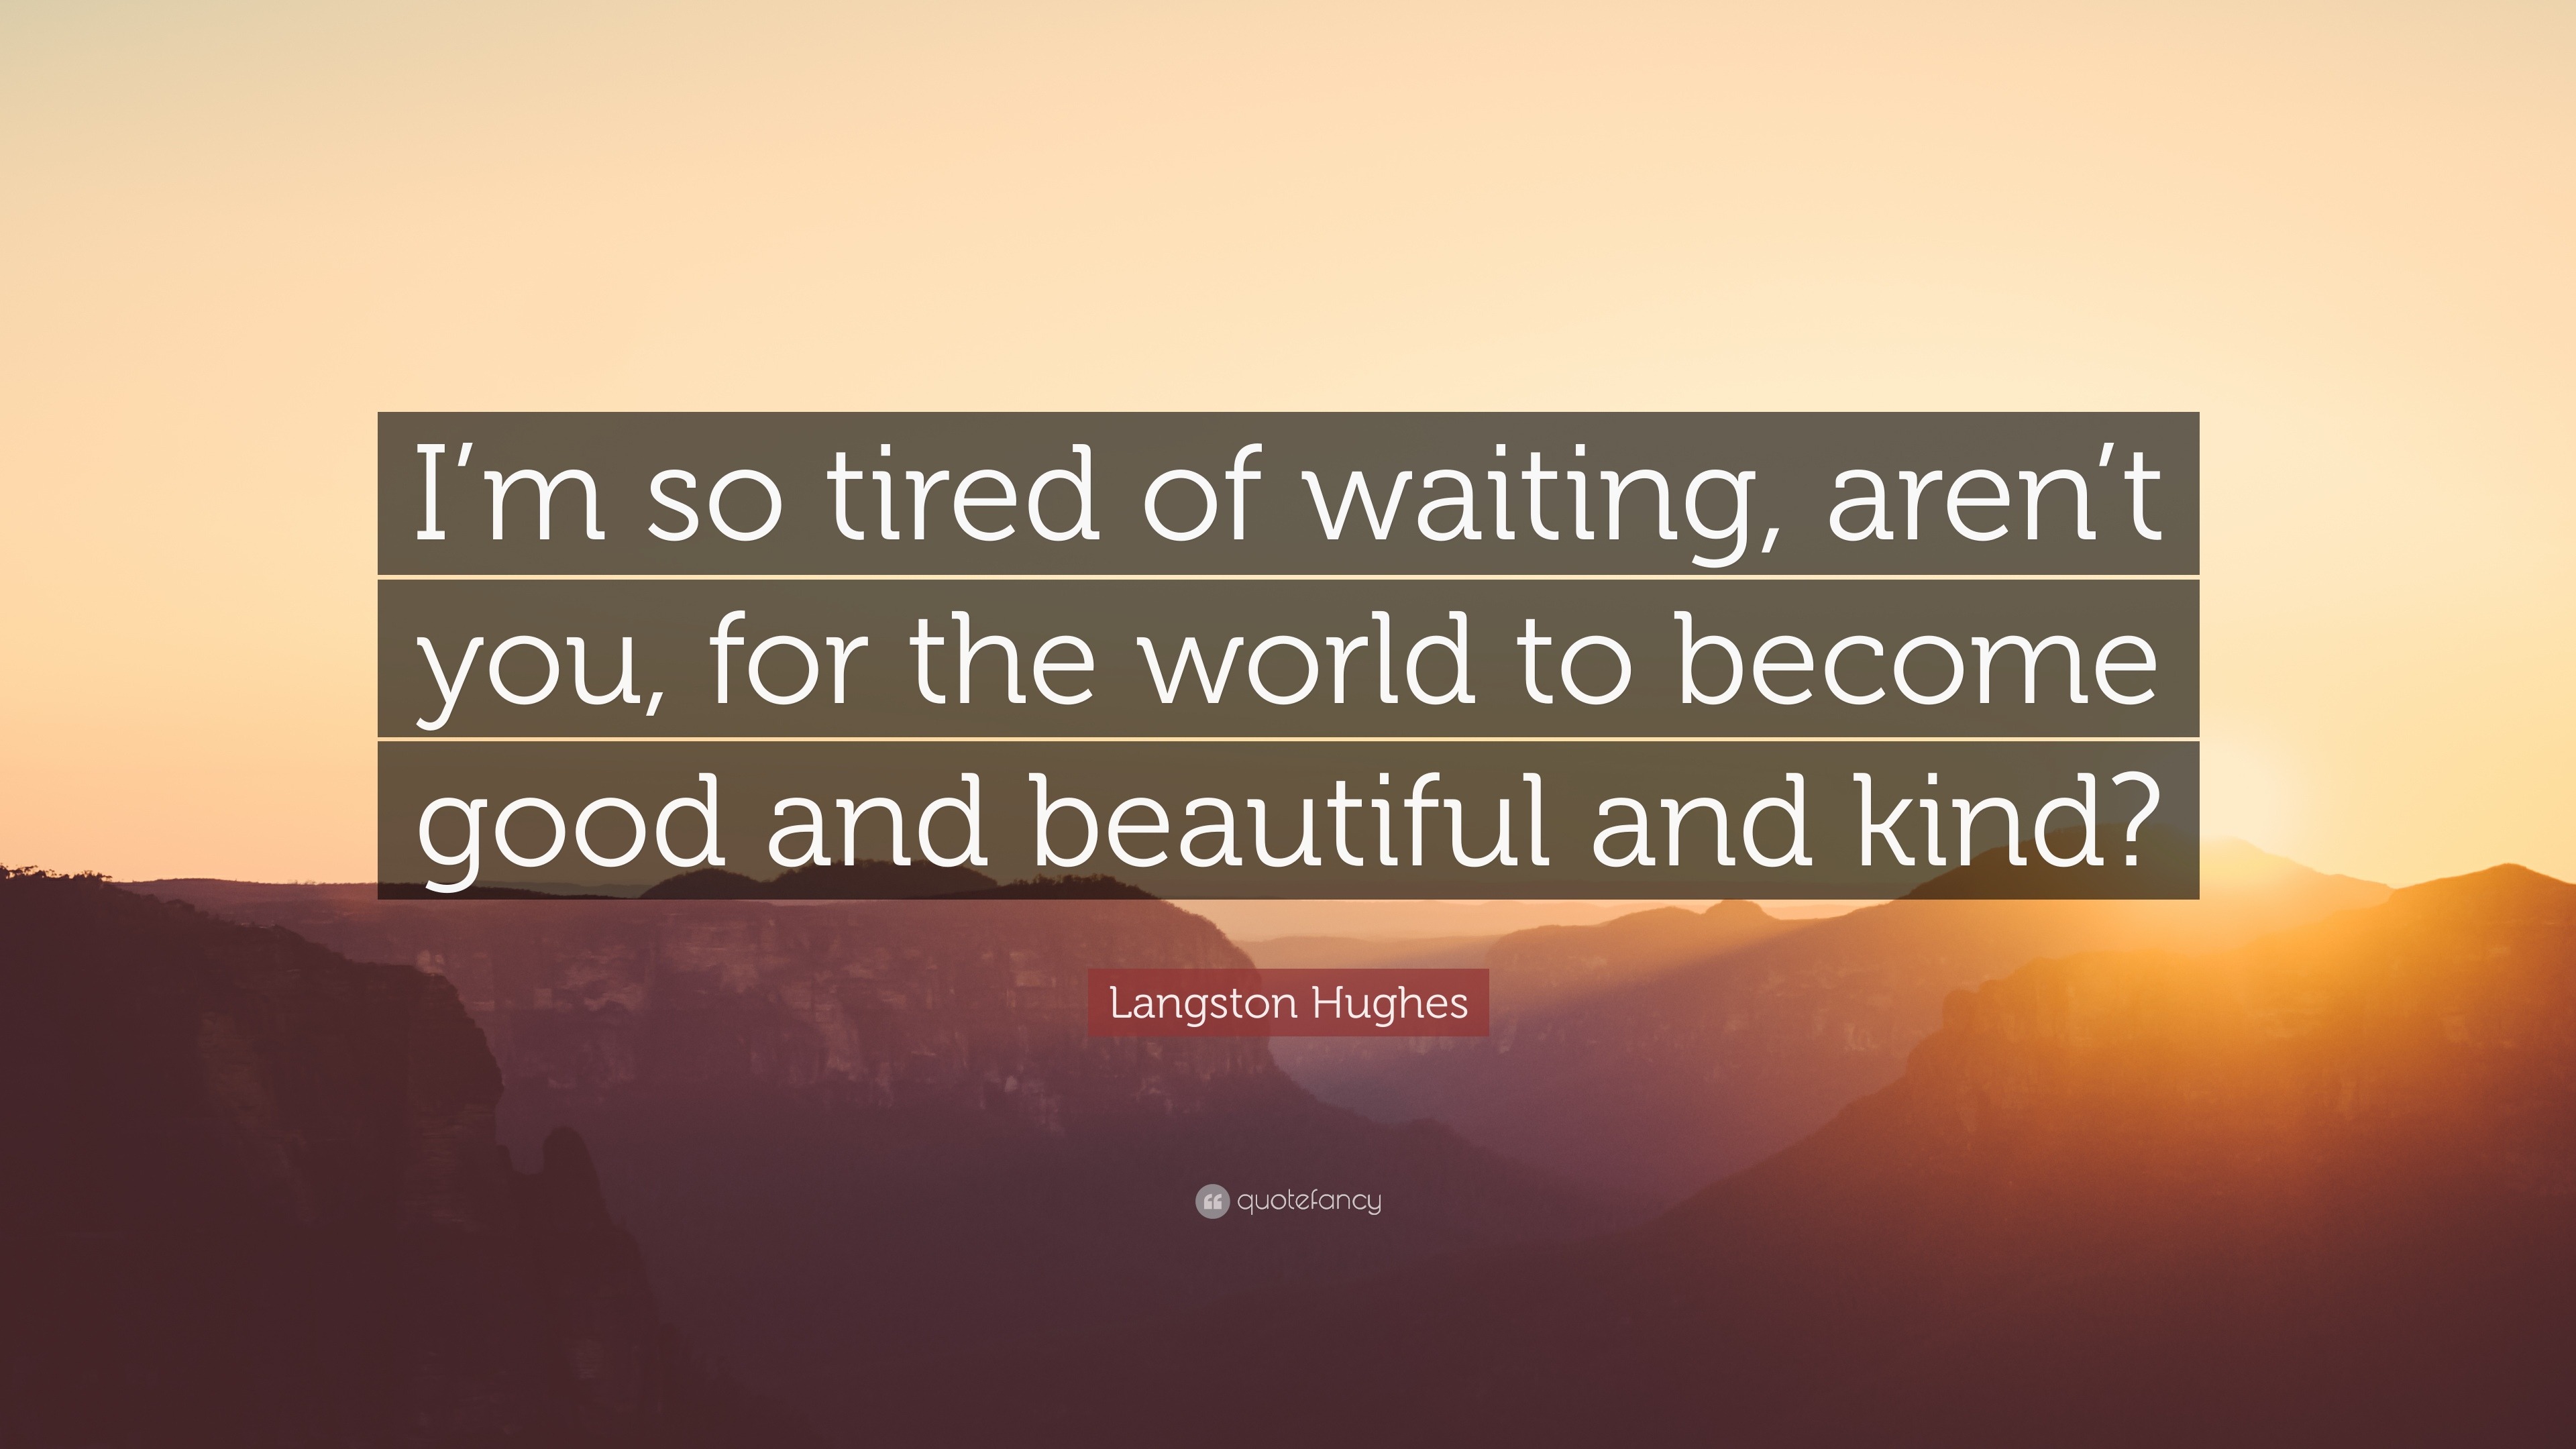 Langston Hughes Quote: “I’m so tired of waiting, aren’t you, for the